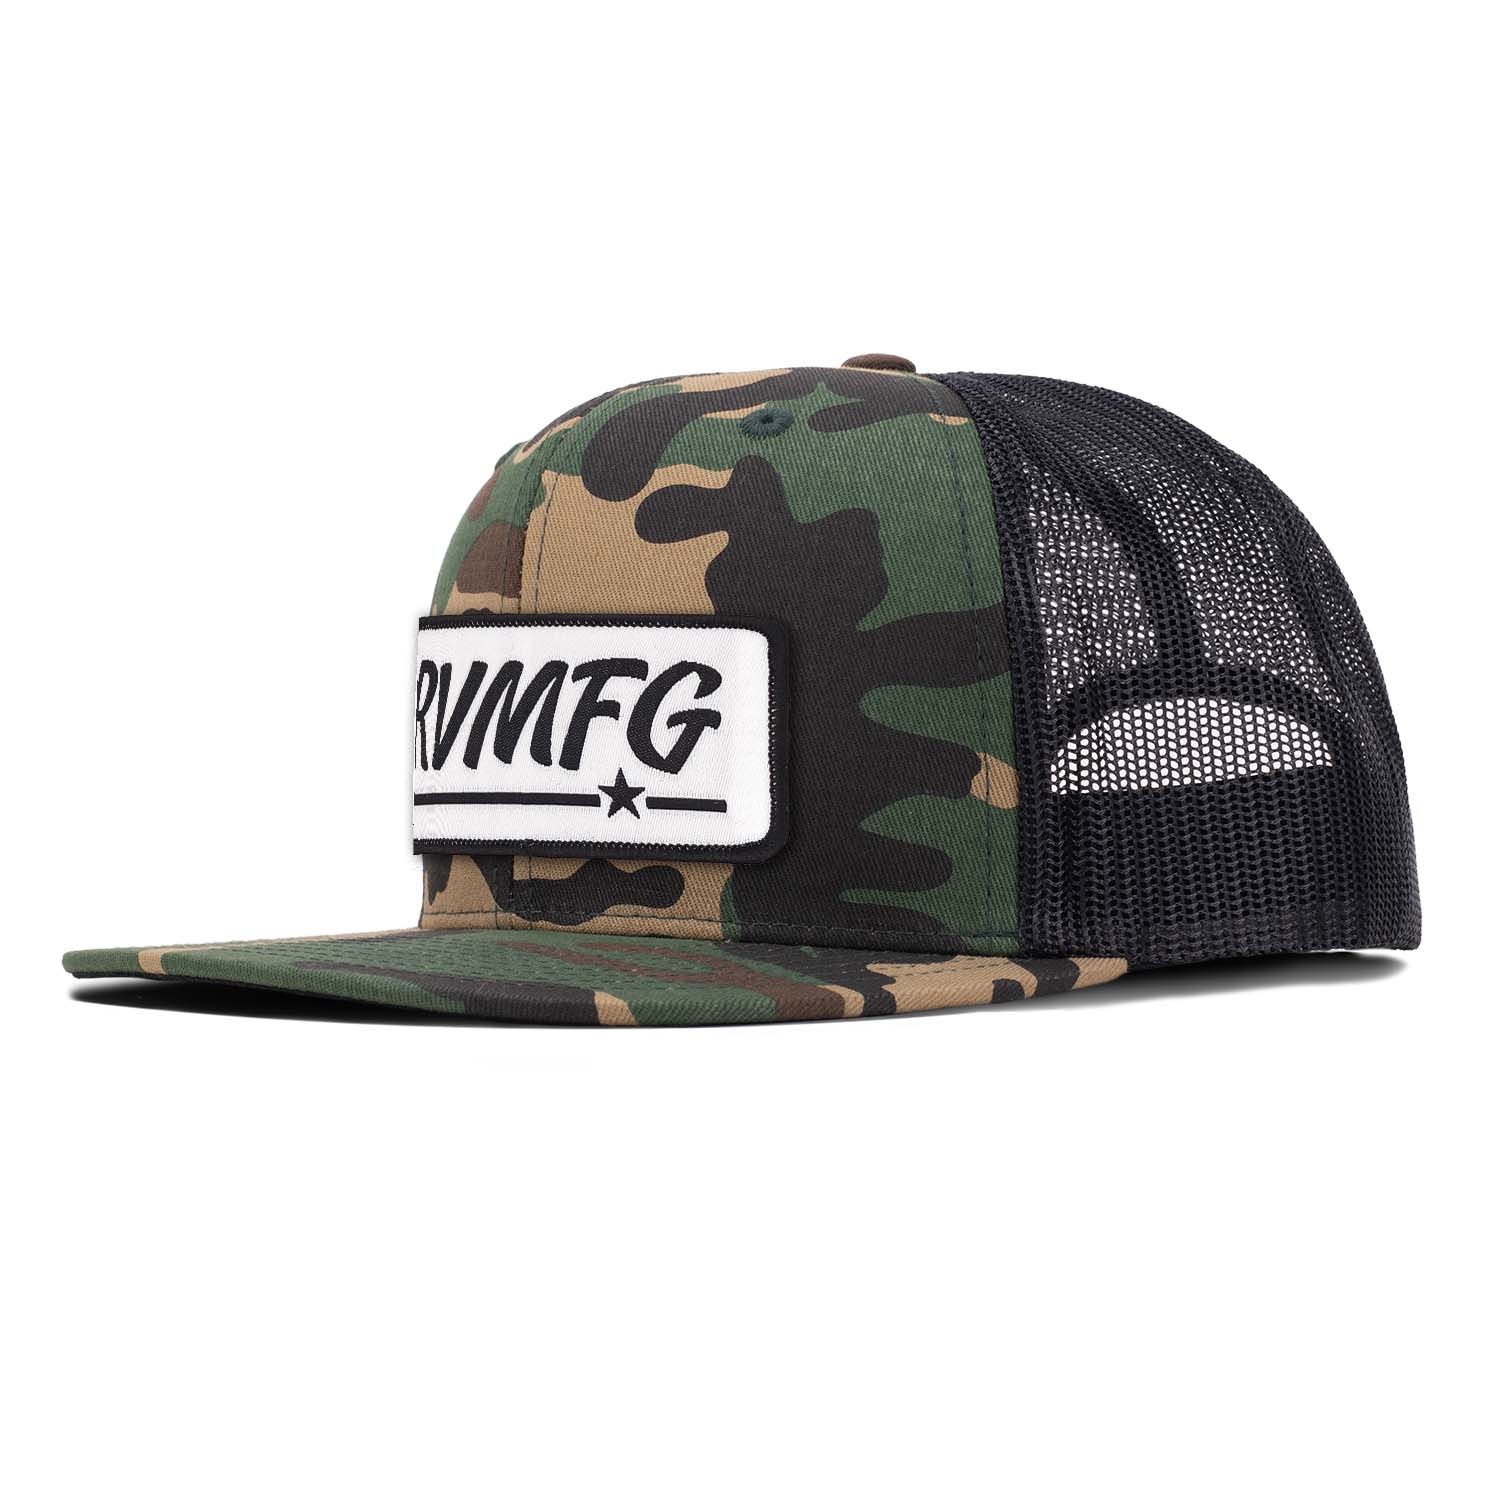 Revolution Mfg flat bill trucker hat in woodland camo with black mesh with a white RVMFG woven patch with black letters and a black border